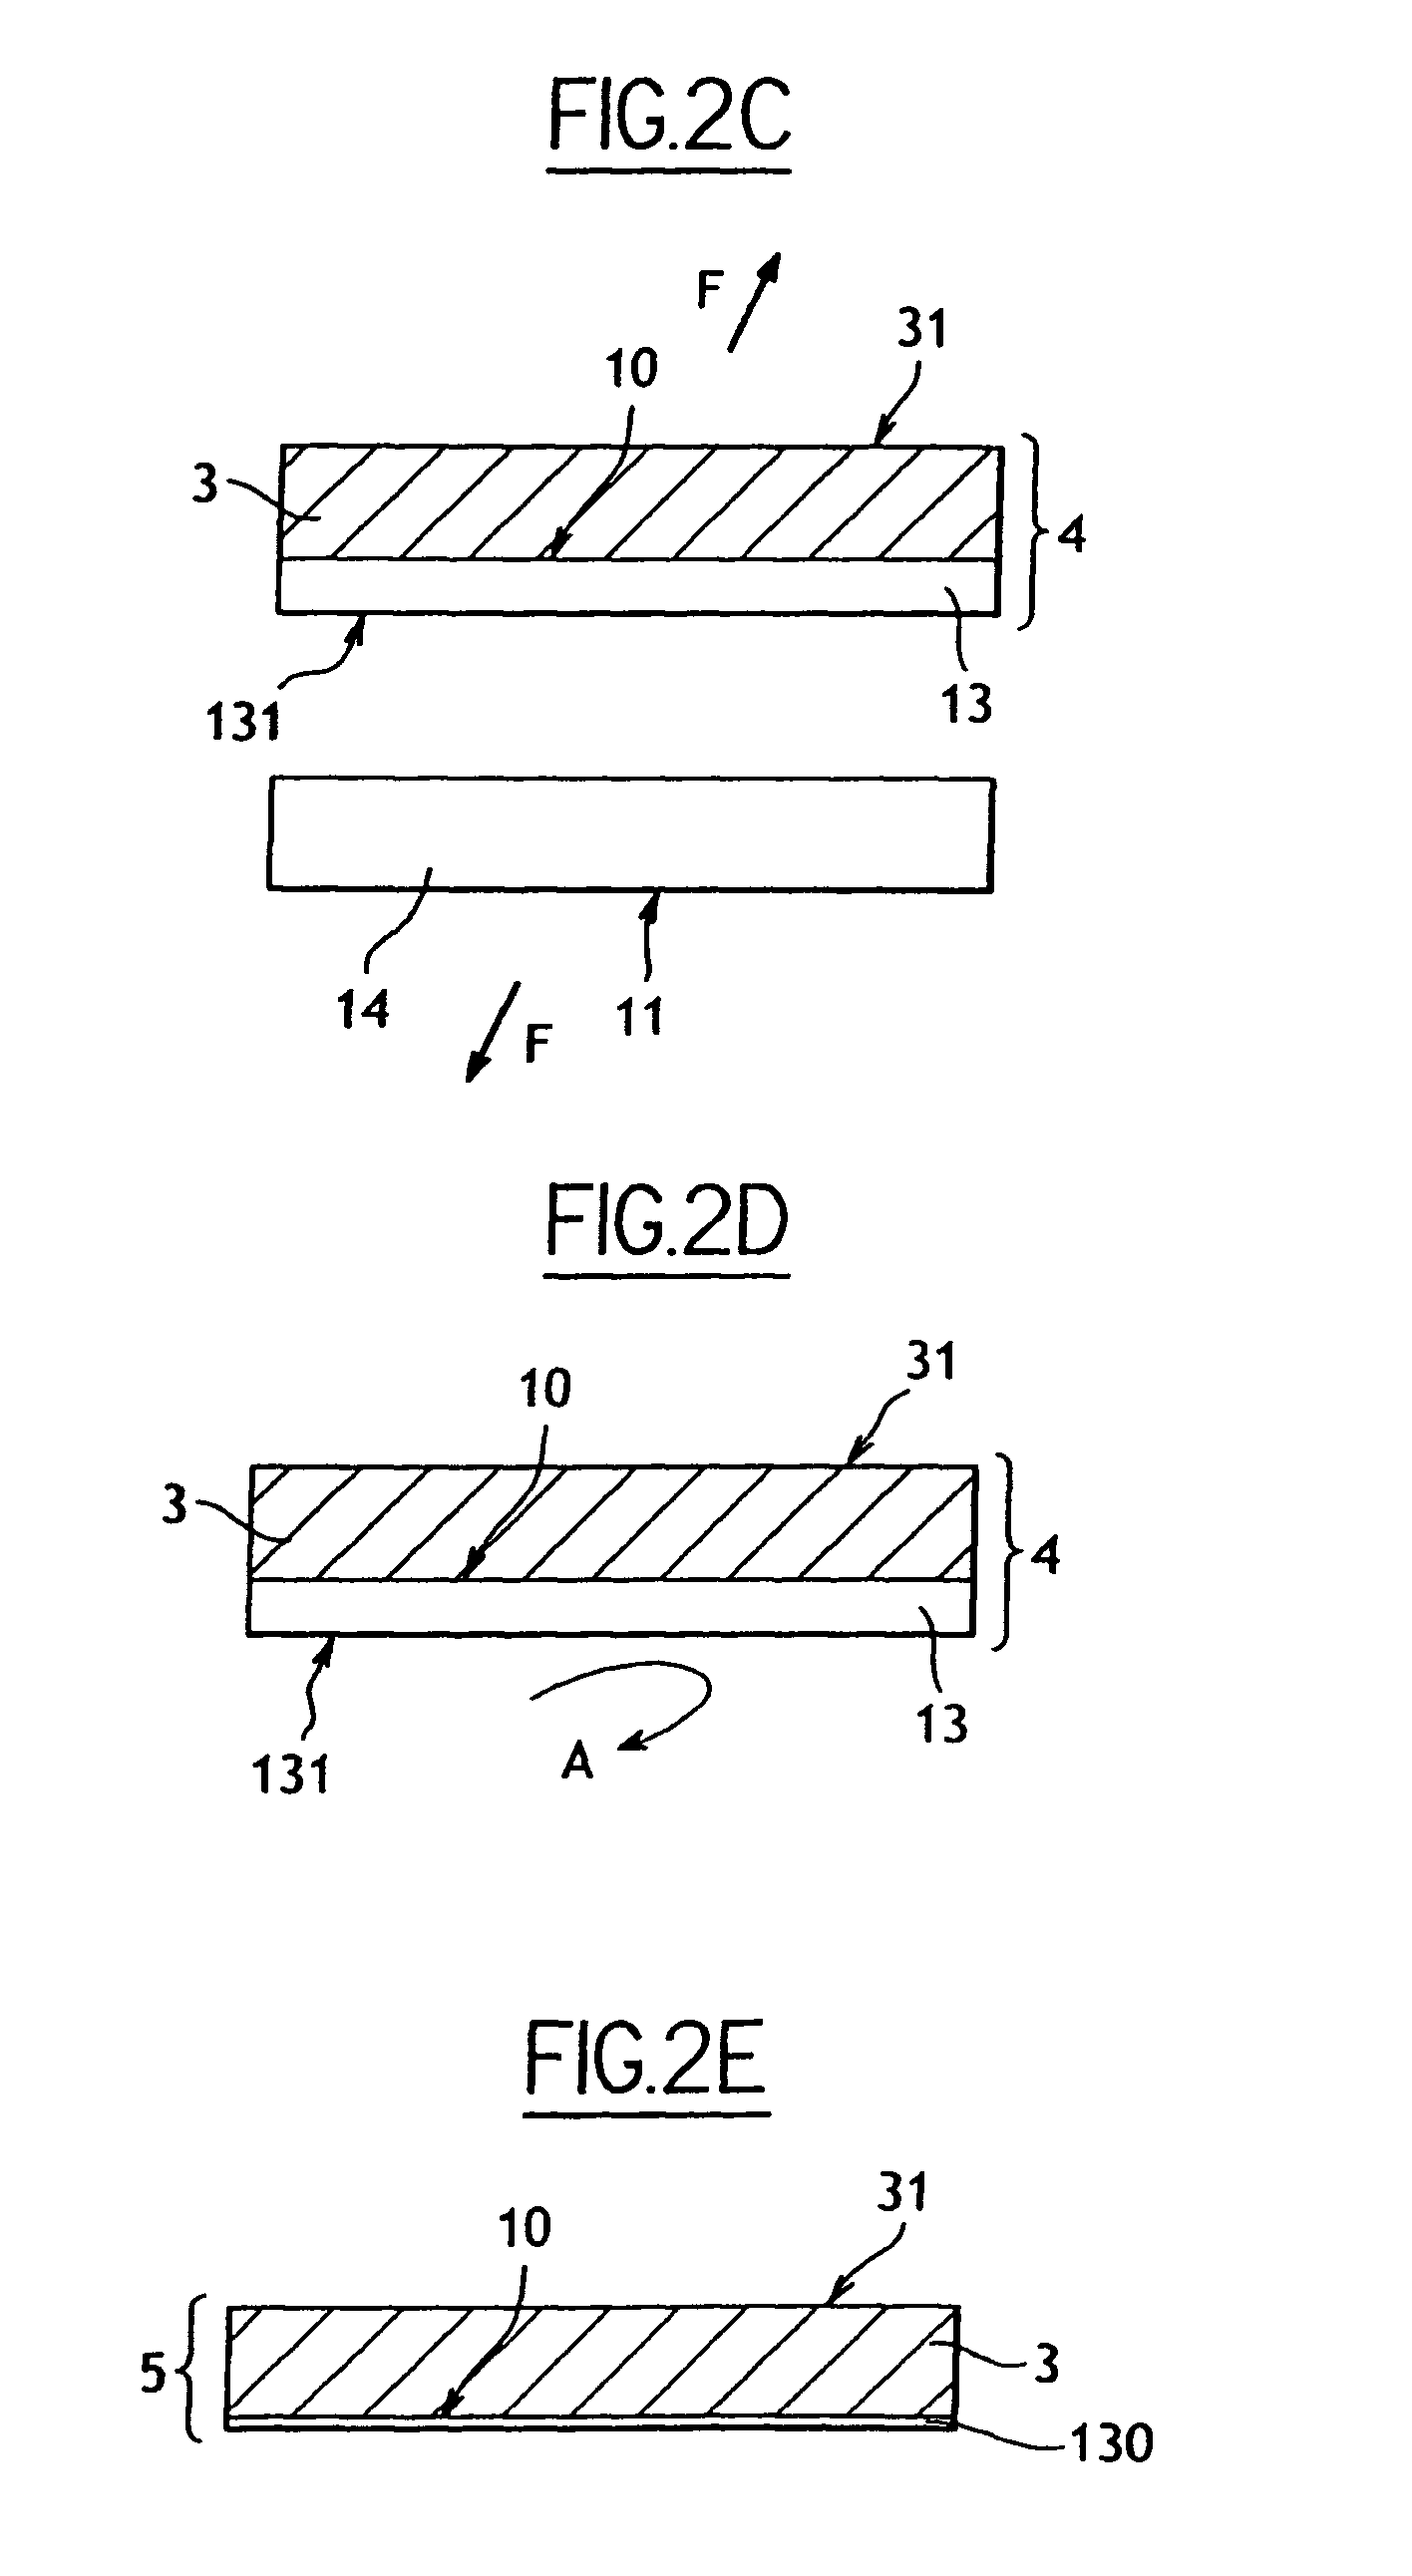 Method of producing a semiconductor structure having at least one support substrate and an ultrathin layer